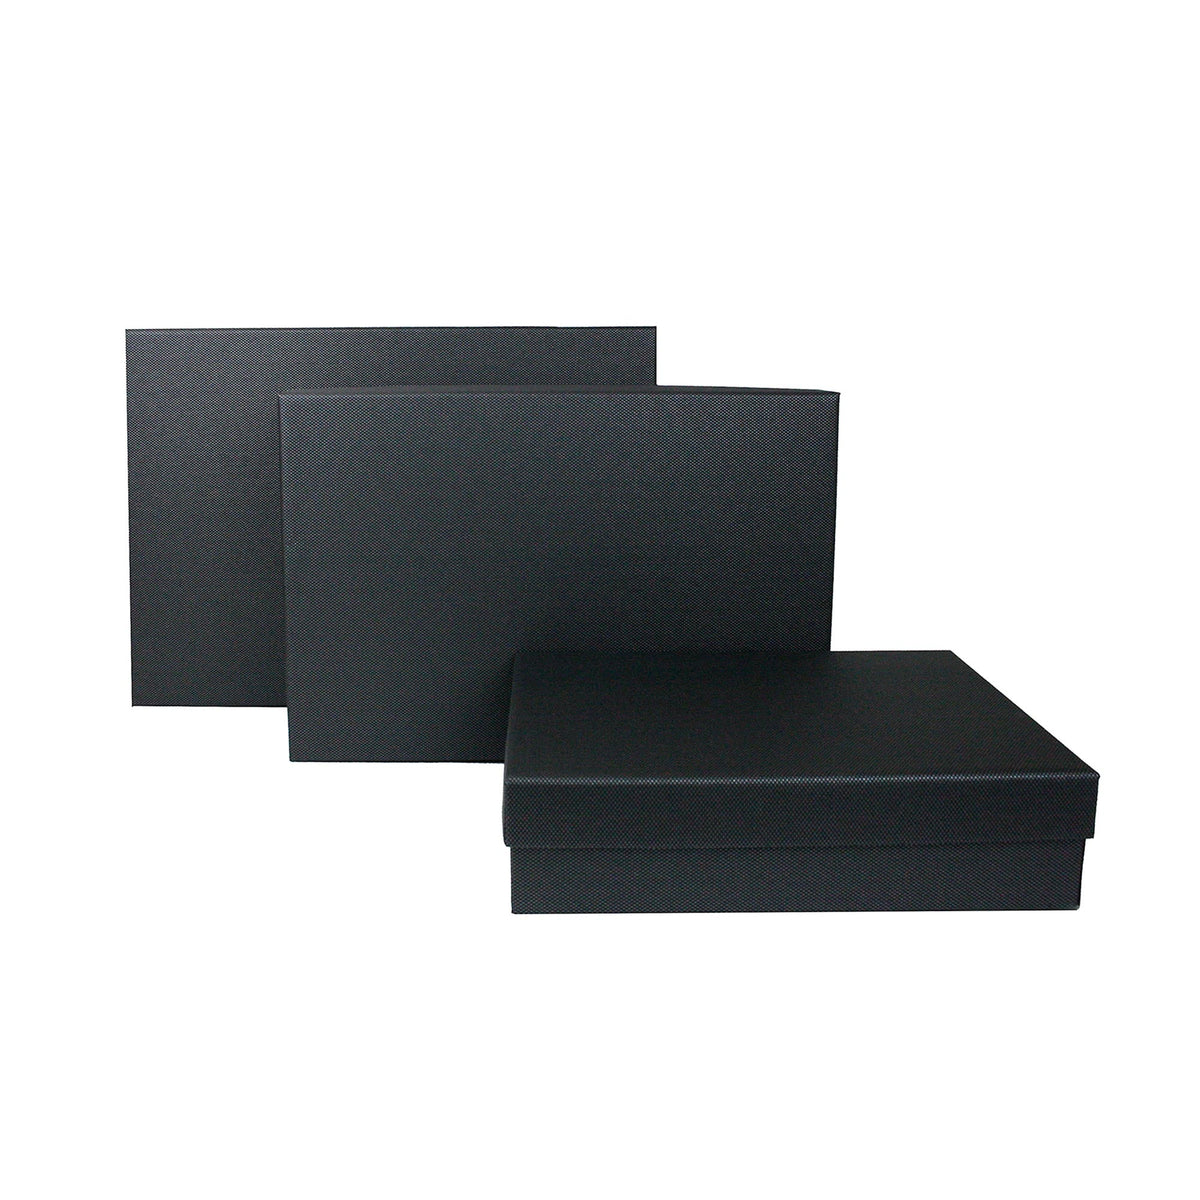 Set of 3 Textured Black Gift Boxes